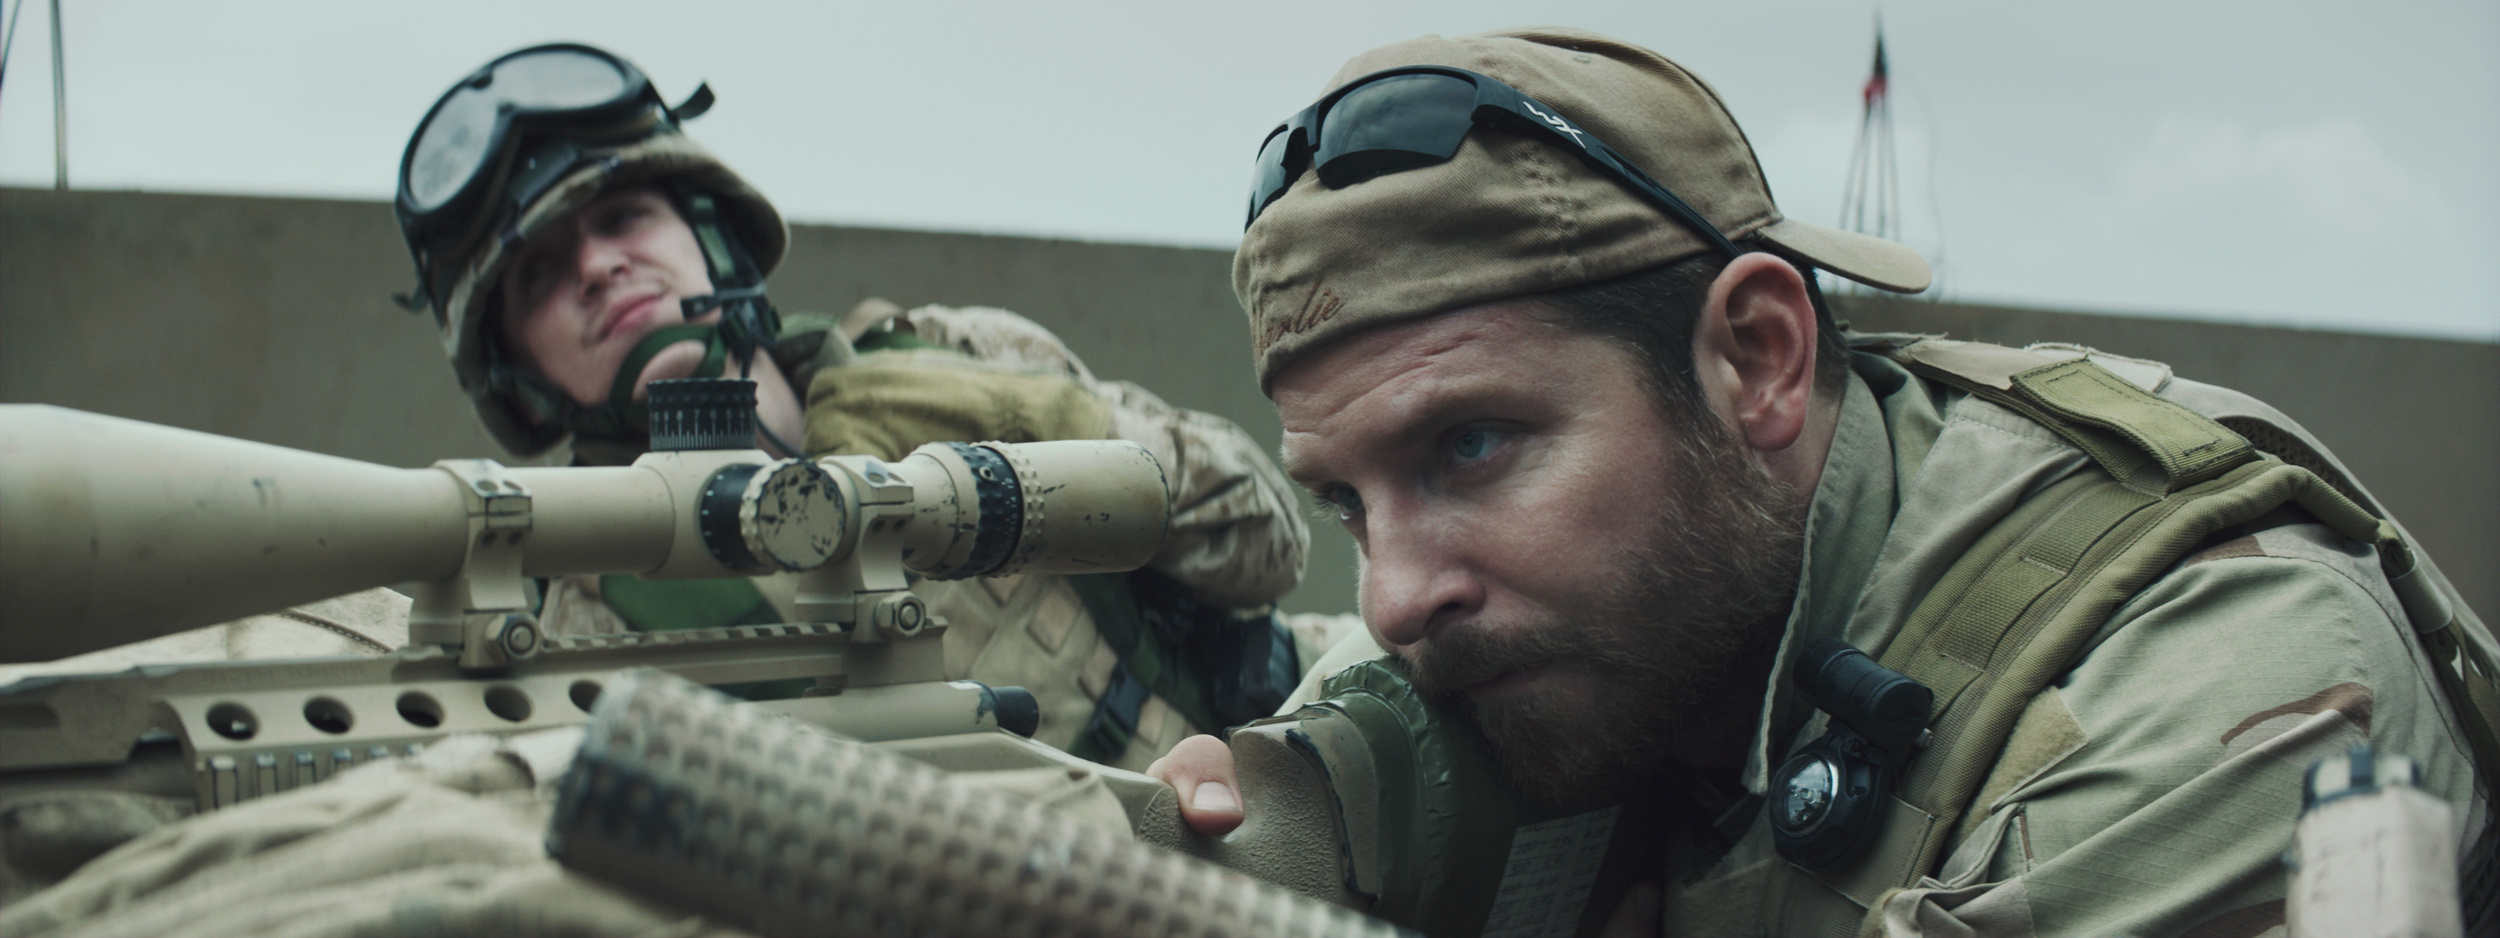 <p>In retrospect, much of this movie’s legacy centers around Bradley Cooper and the horribly unrealistic baby used as a prop. But what isn’t talked about is that <em>American Sniper</em> is based on an autobiography of the same name. Let’s all try to forget about the baby. </p><p>You may also like: <a href='https://www.yardbarker.com/entertainment/articles/all_the_right_moves_21_of_the_best_dance_scenes_in_film_032024/s1__39242543'>All the right moves: 21 of the best dance scenes in film</a></p>